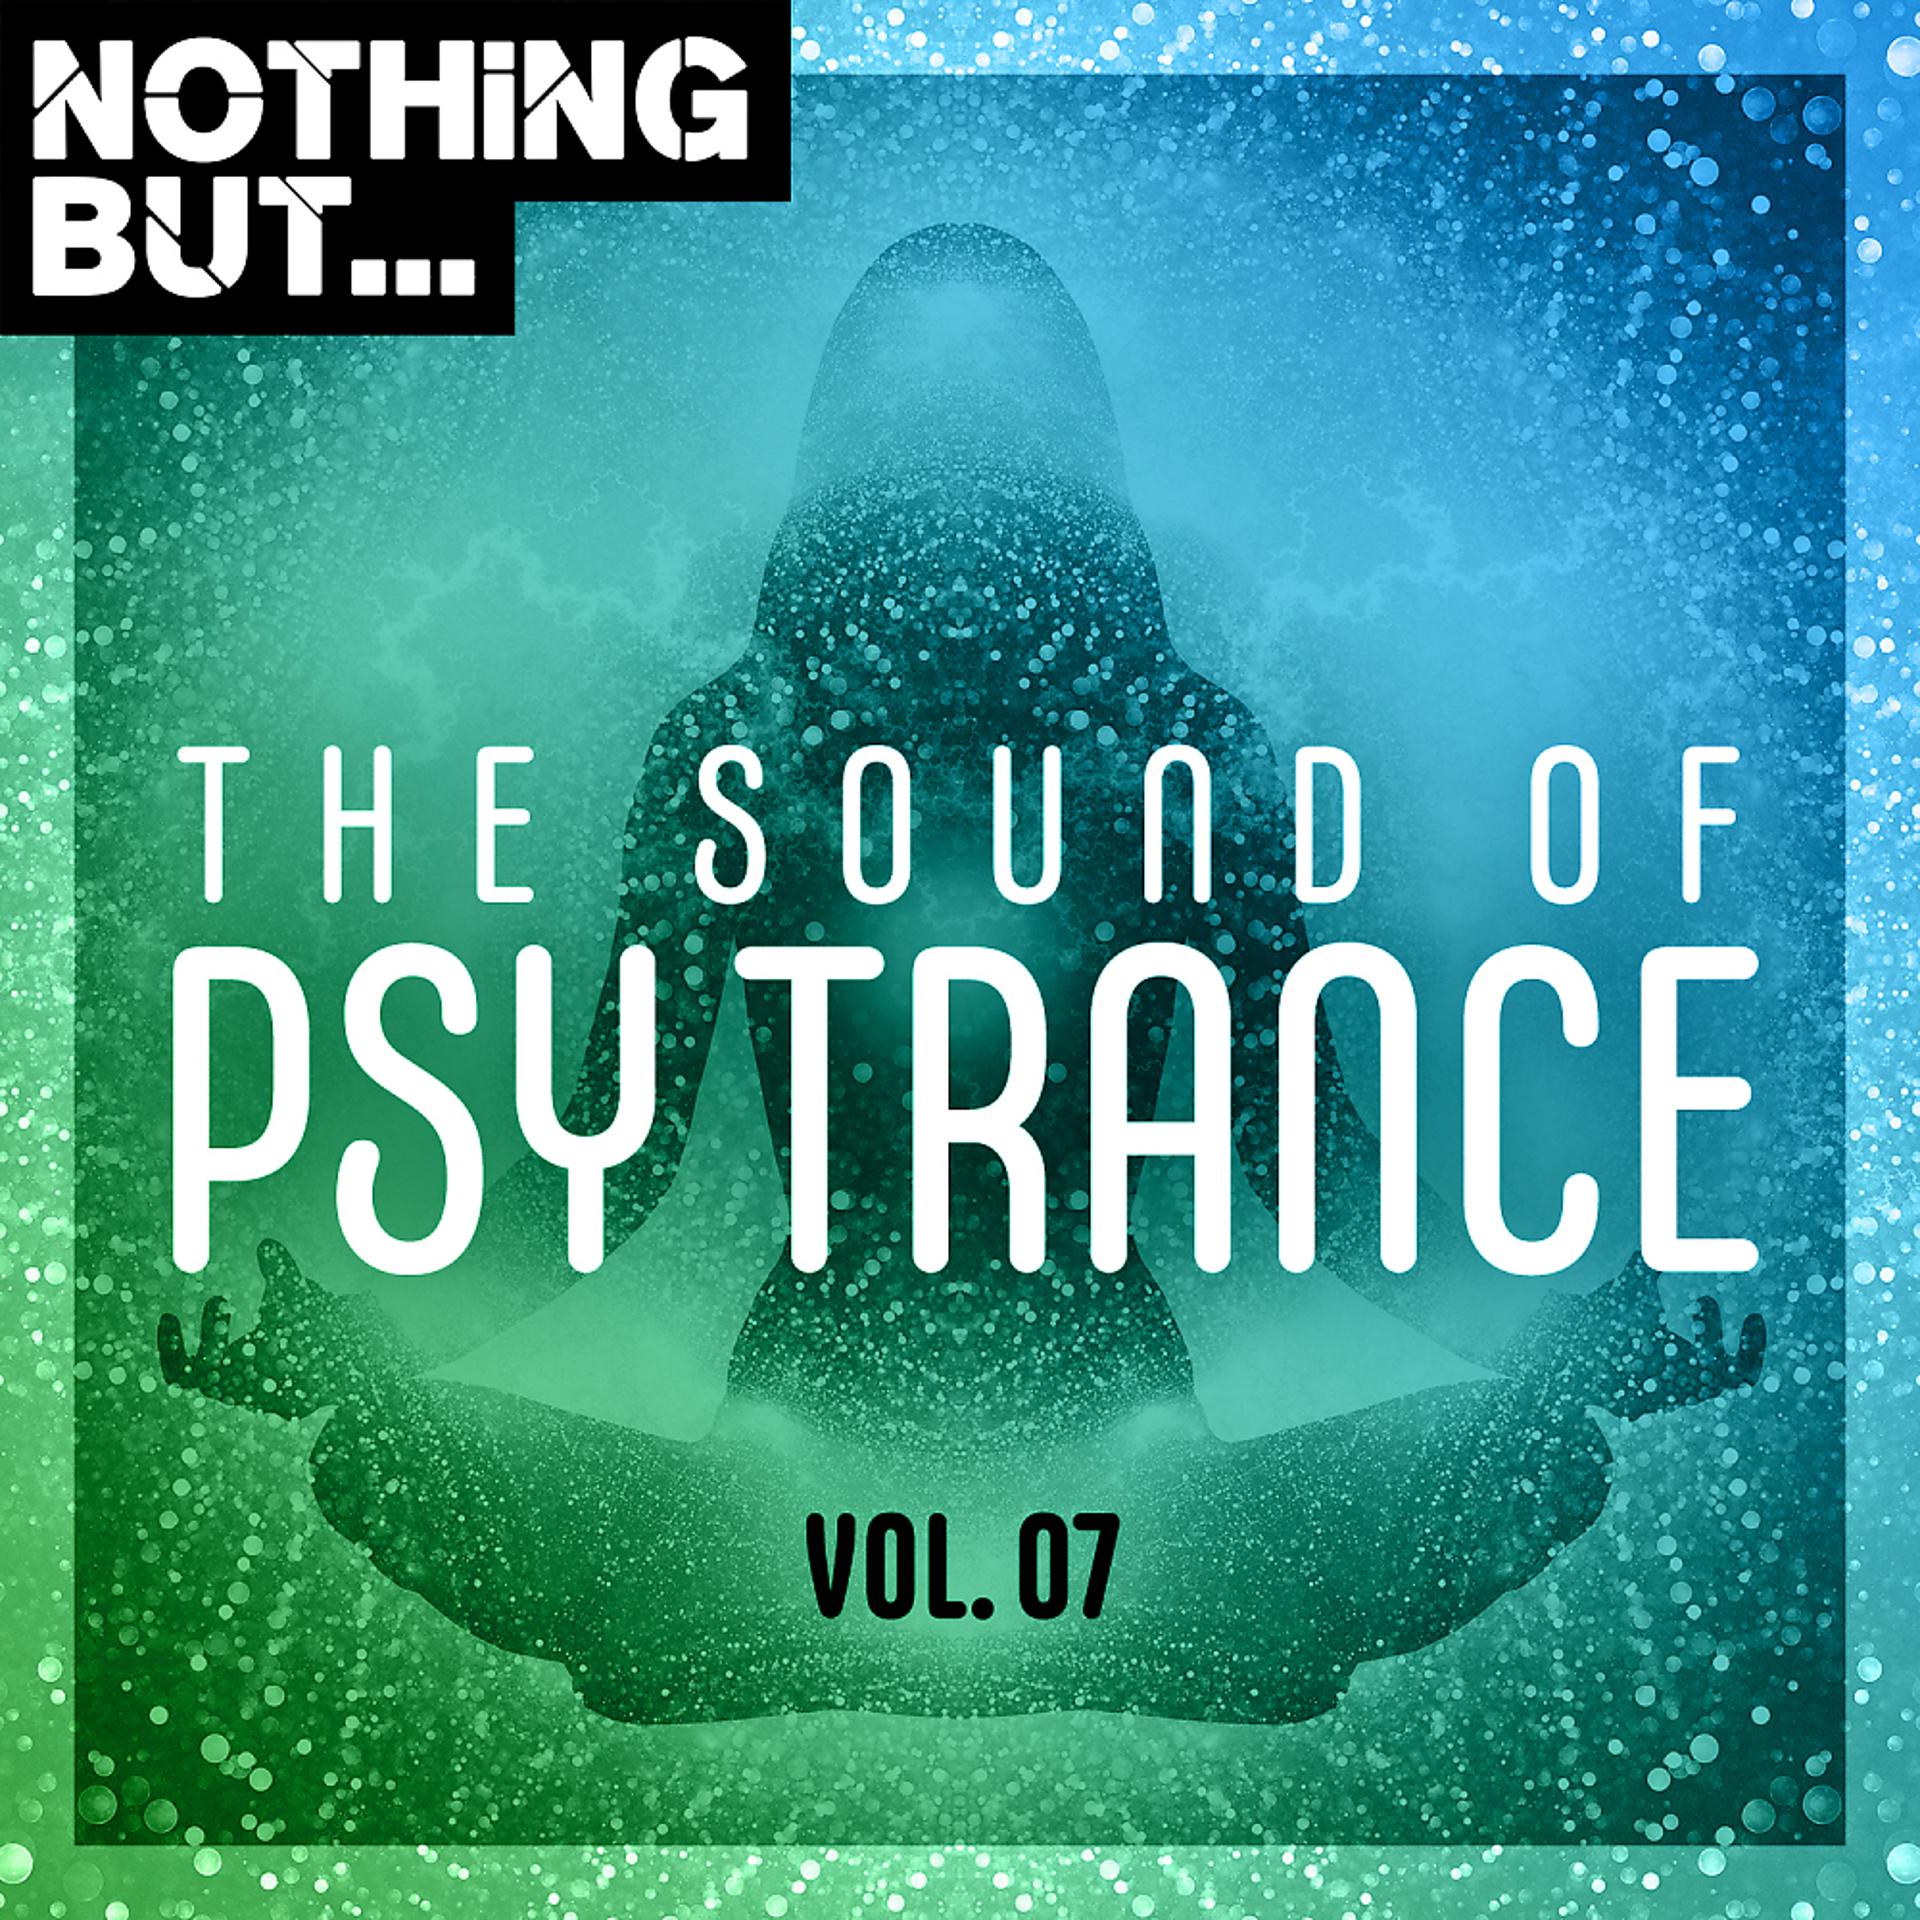 Постер альбома Nothing But... The Sound of Psy Trance, Vol. 07